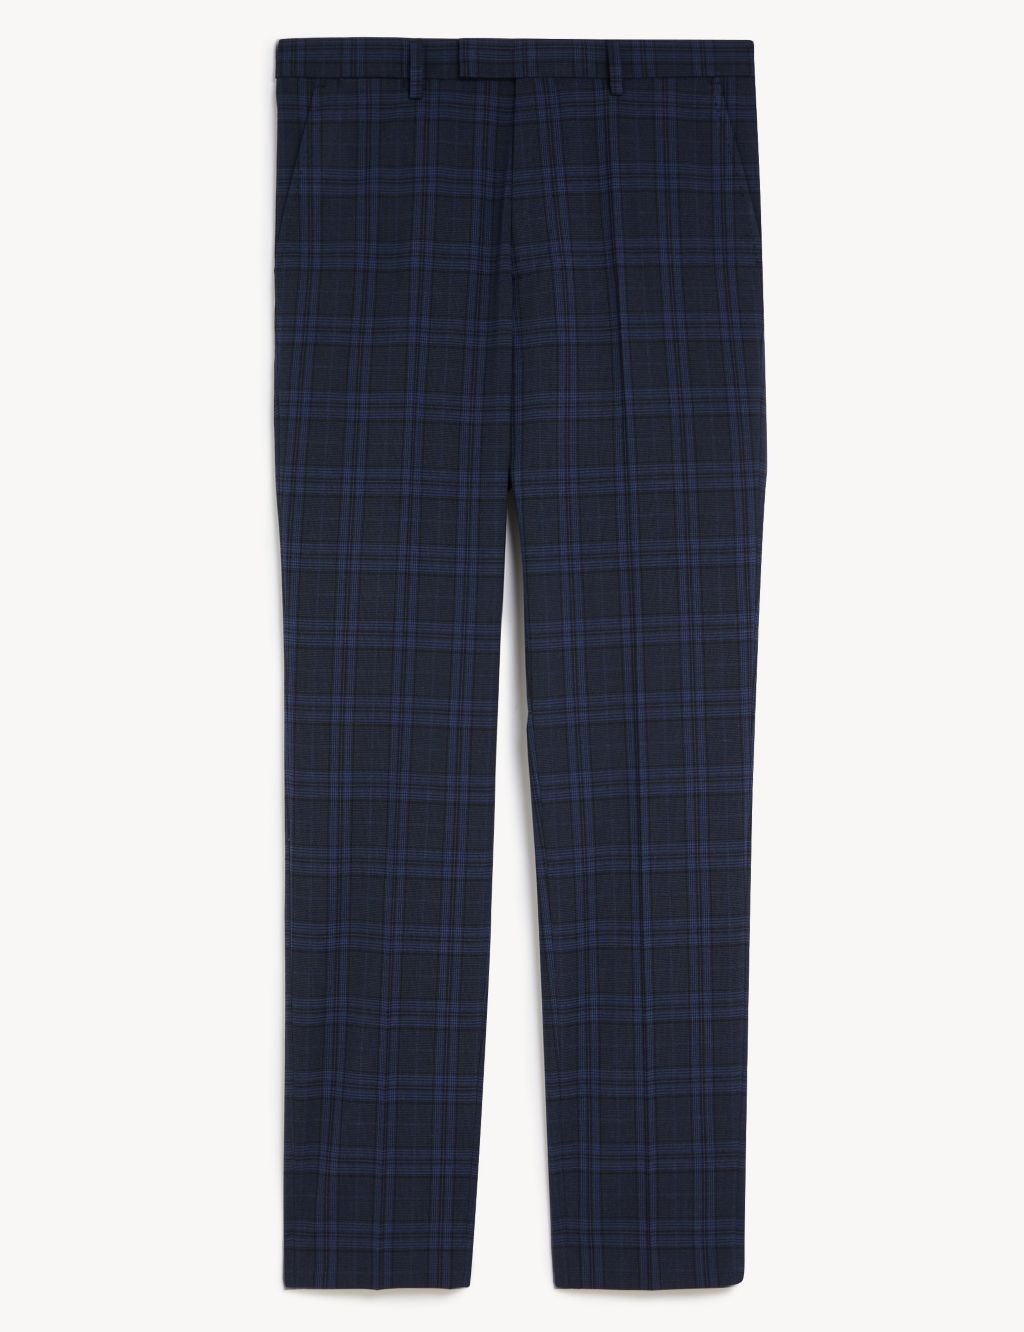 Check Stretch Trousers image 6